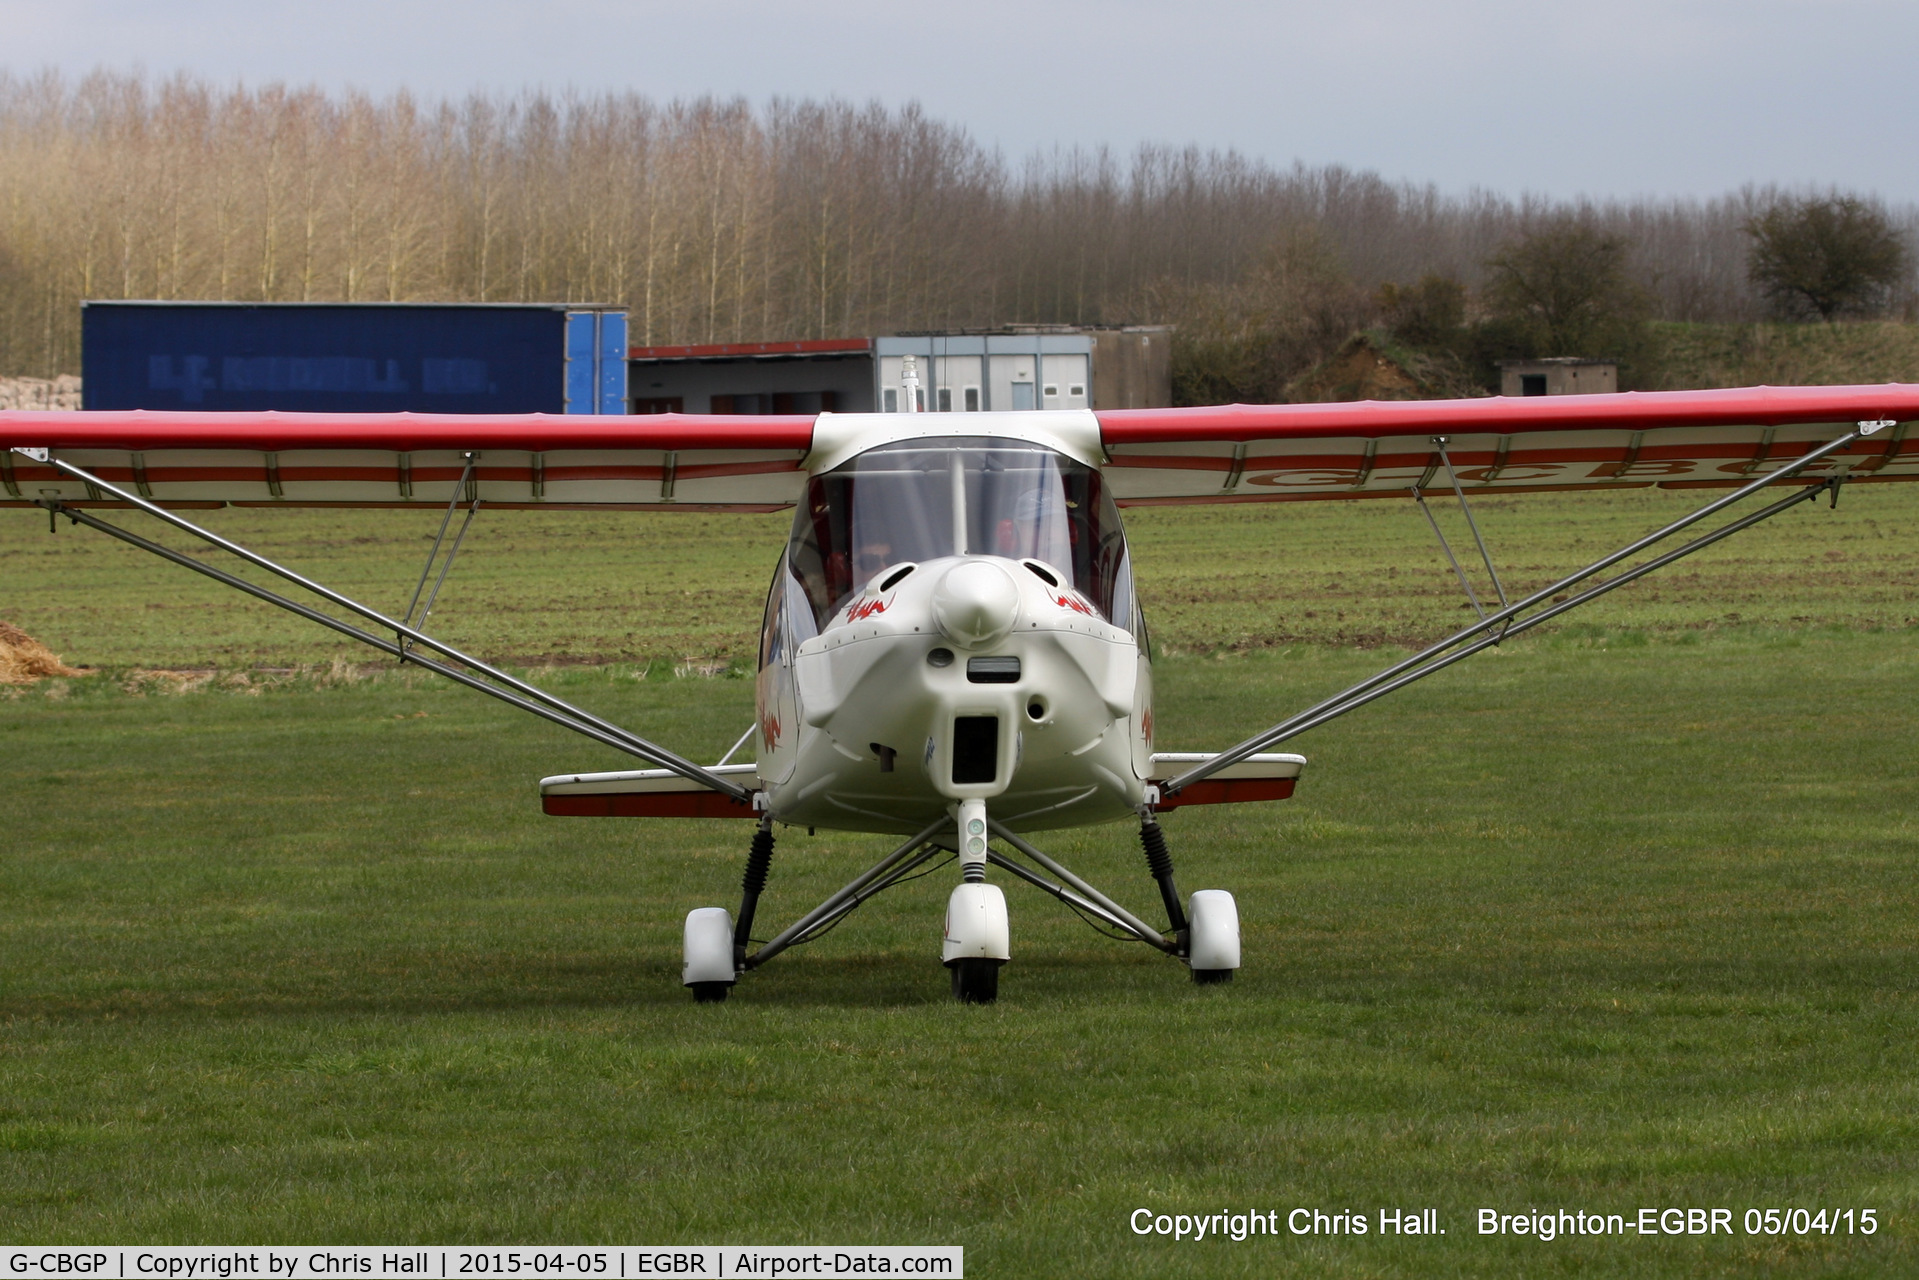 G-CBGP, 2001 Comco Ikarus C42 FB UK C/N PFA 322-13741, at the Easter Homebuilt Aircraft Fly-in